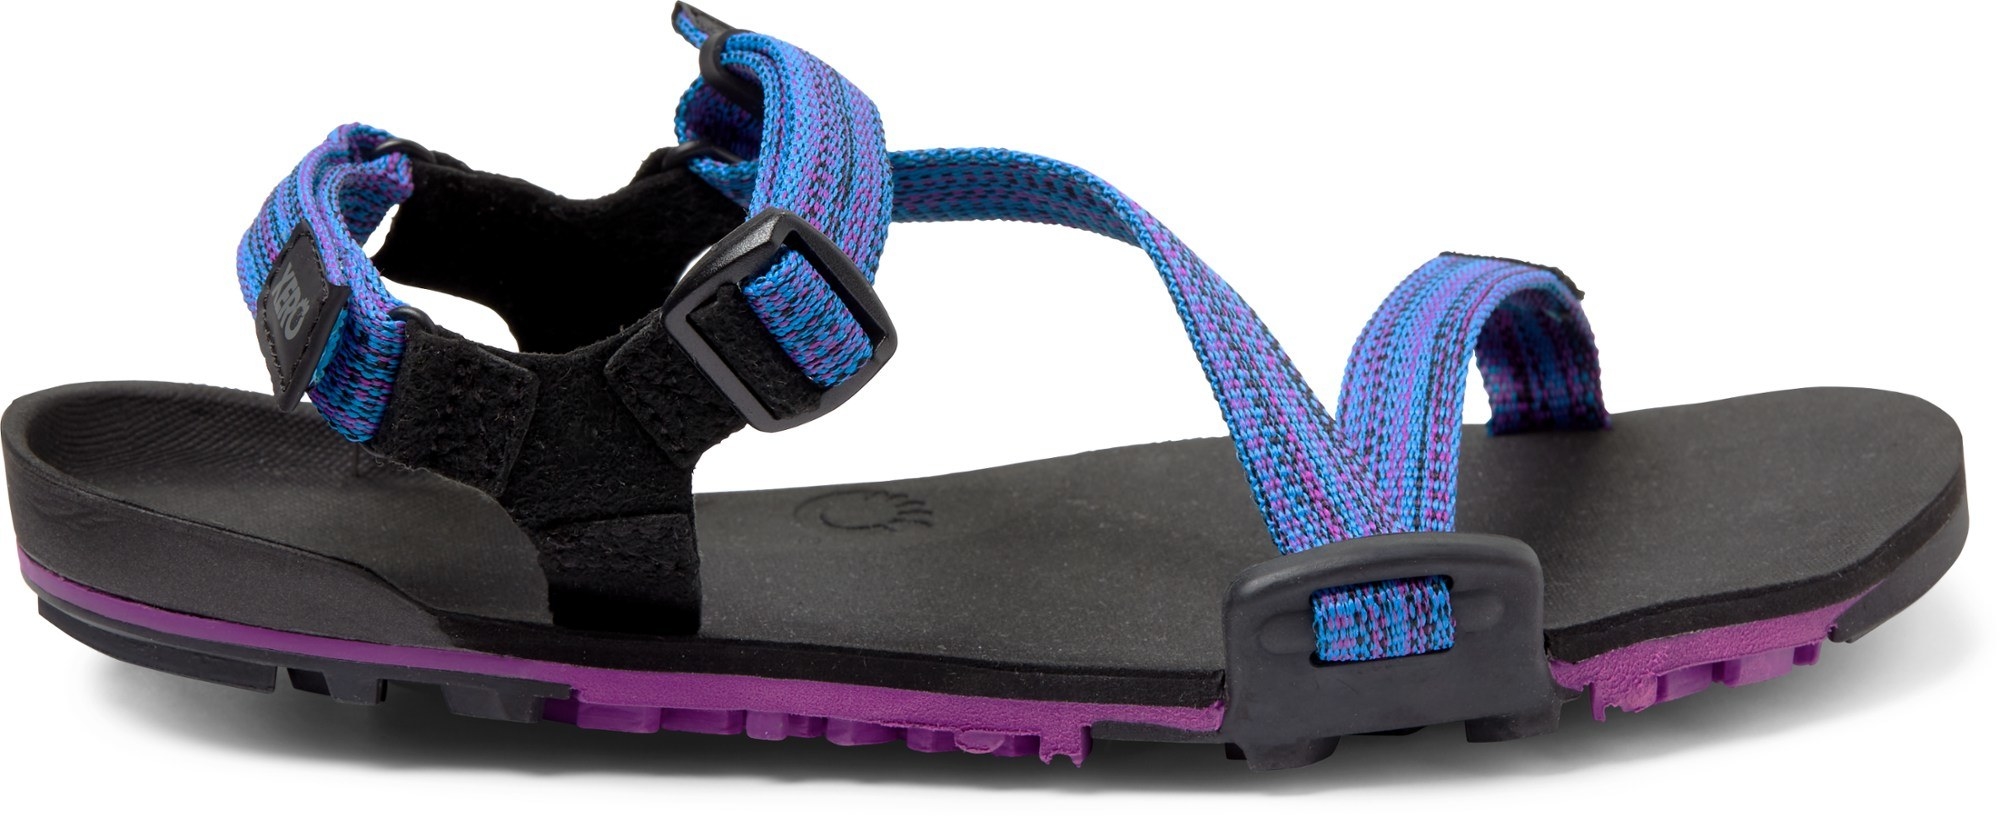 the sandal in black with blue straps and a purple sole